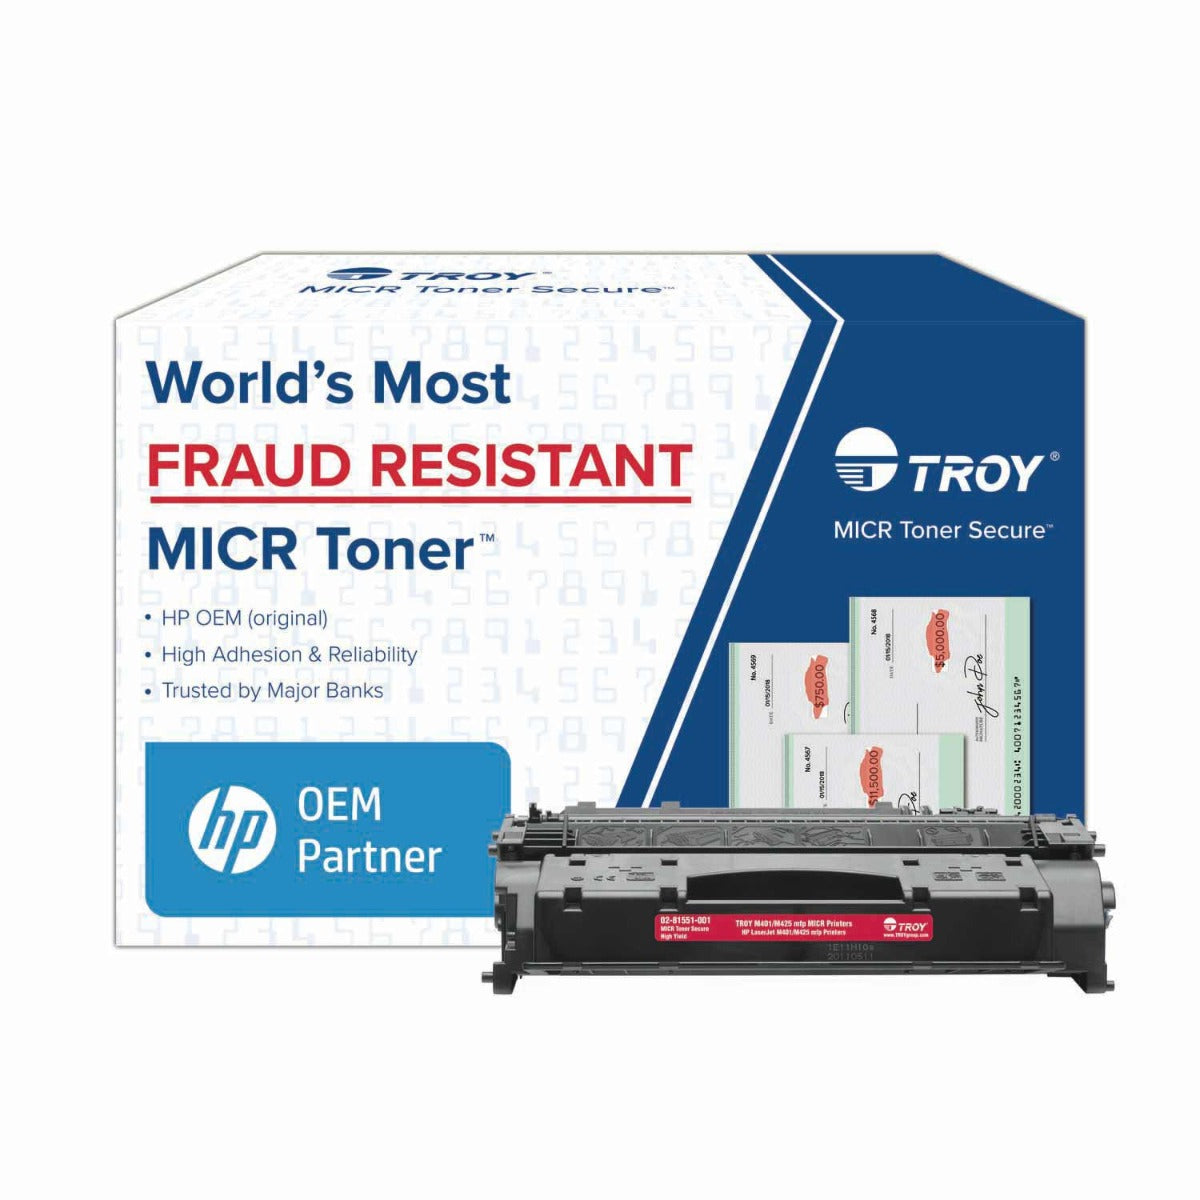 TROY M401/M425MFP MICR Toner Secure High Yield Cartridge (Coordinating HP Part Number: CF280X)